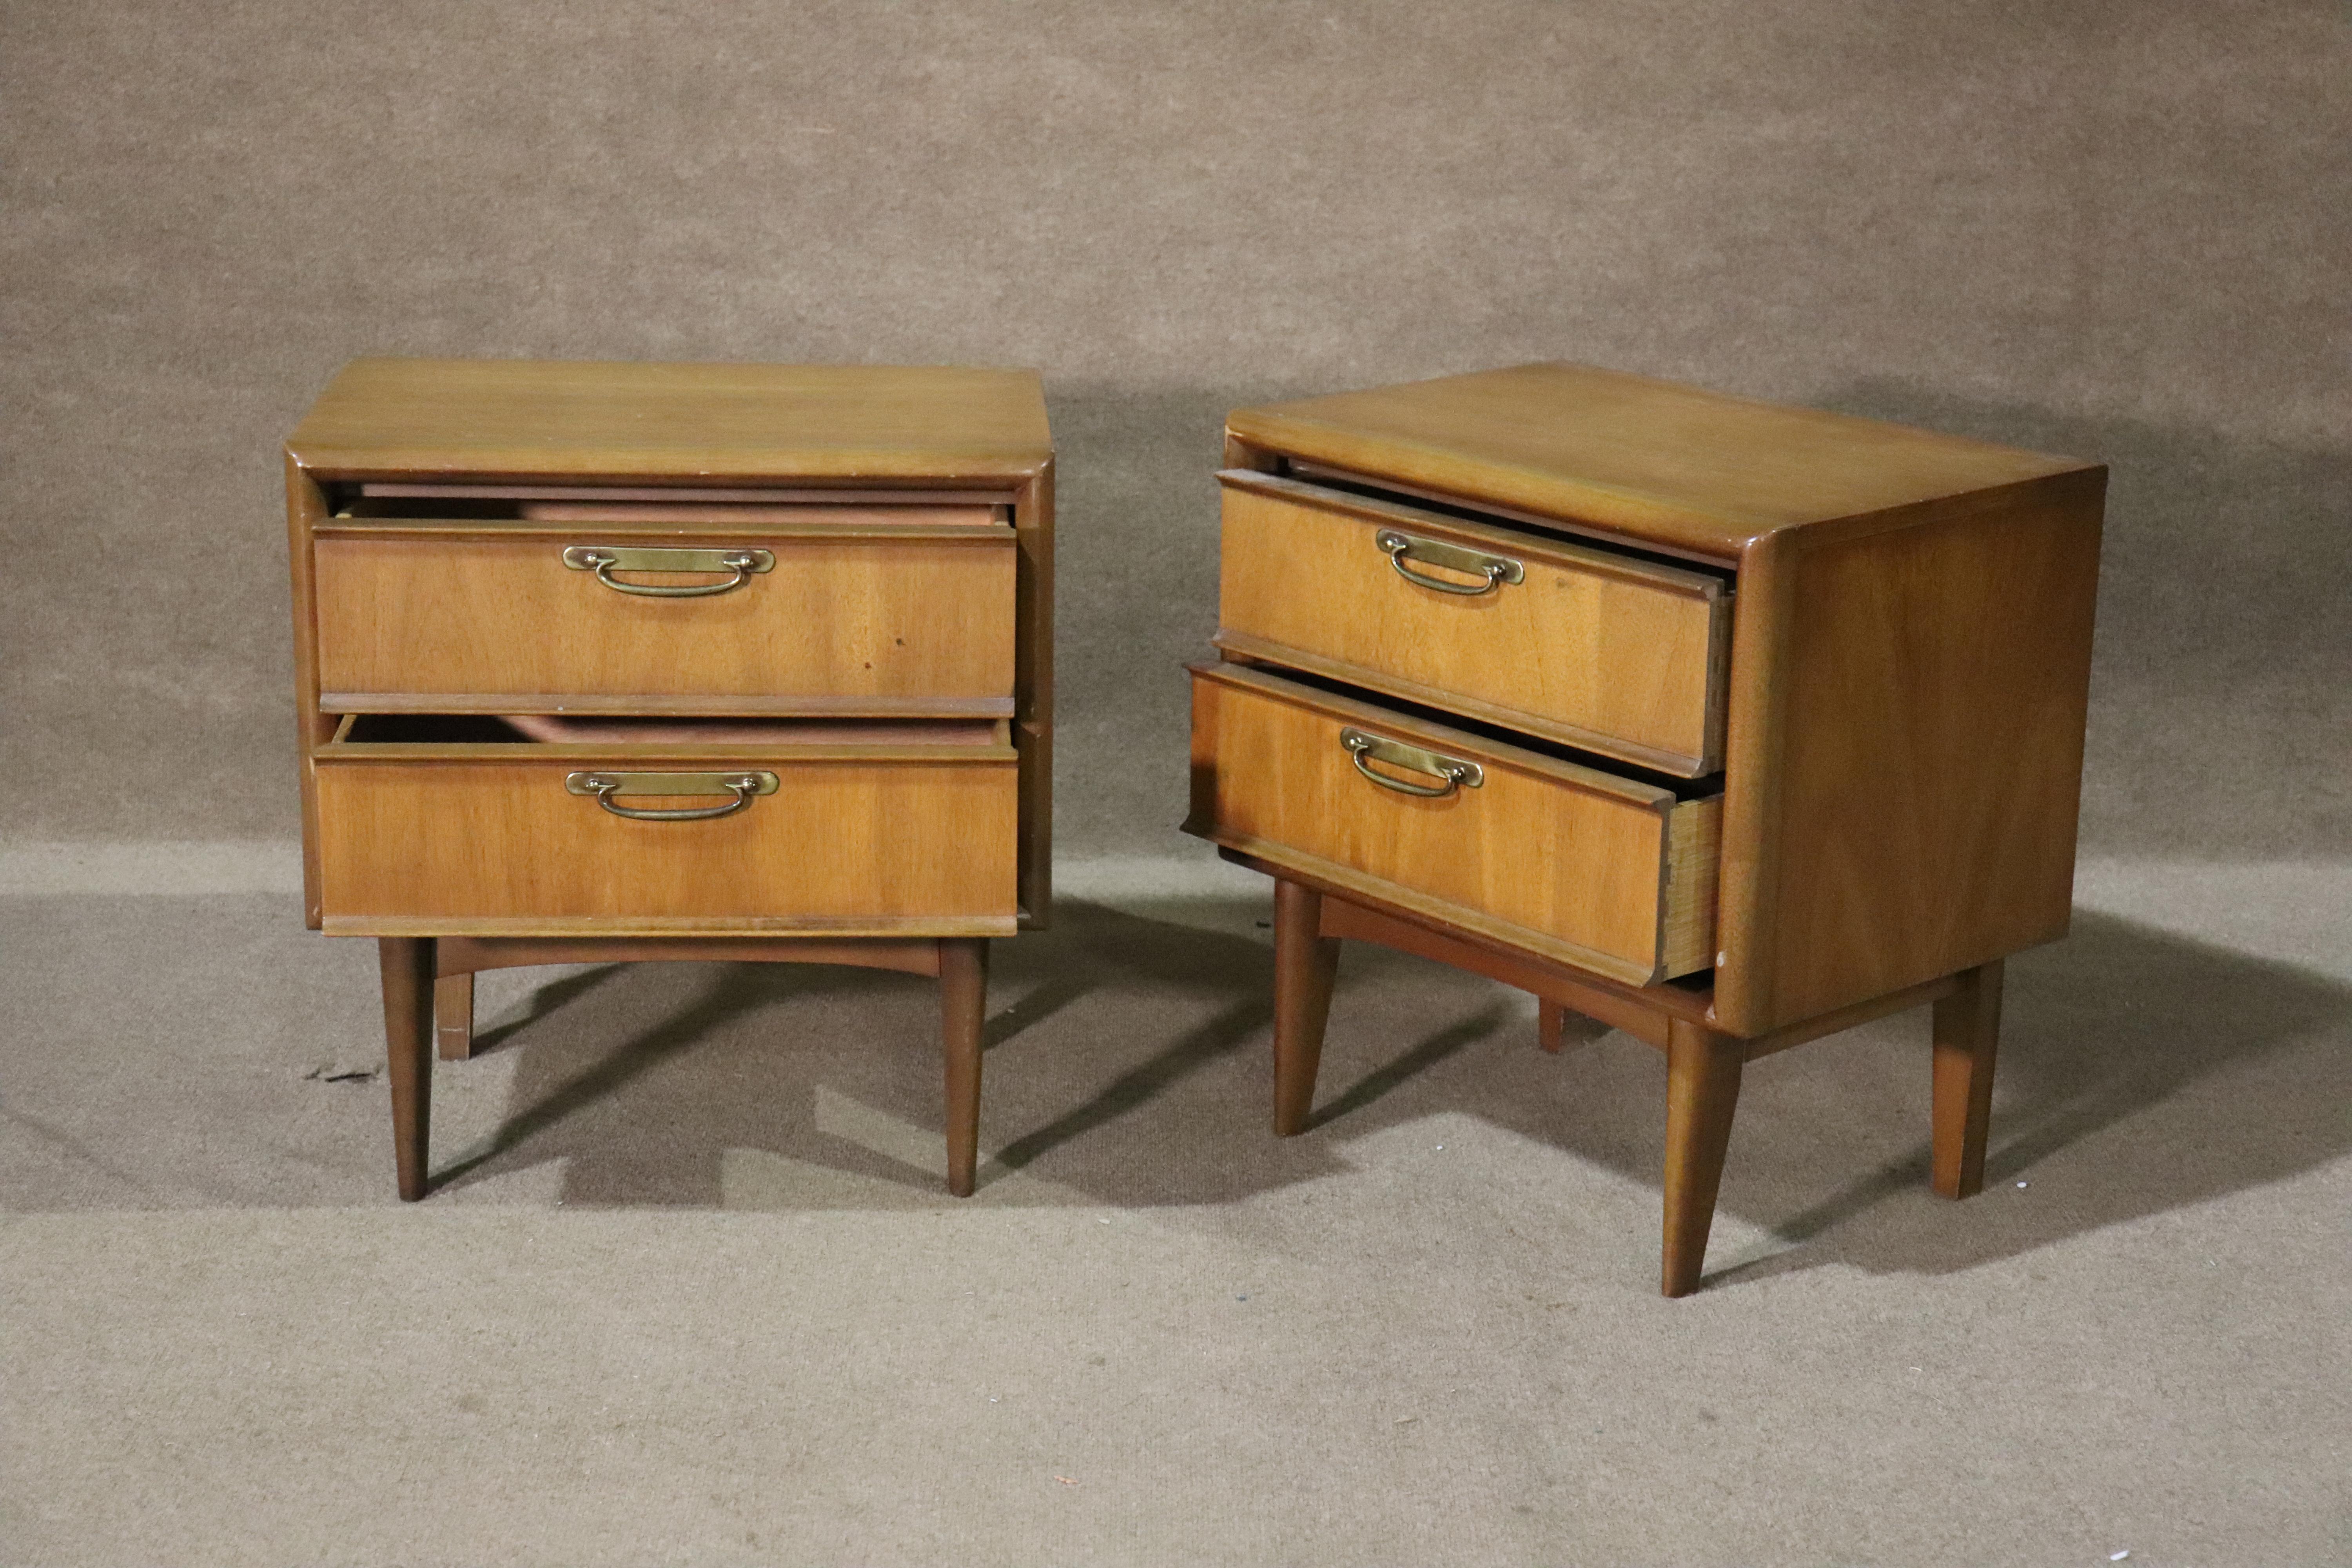 Pair of mid-century walnut end tables with two drawers and brass hardware.
Please confirm location NY or NJ